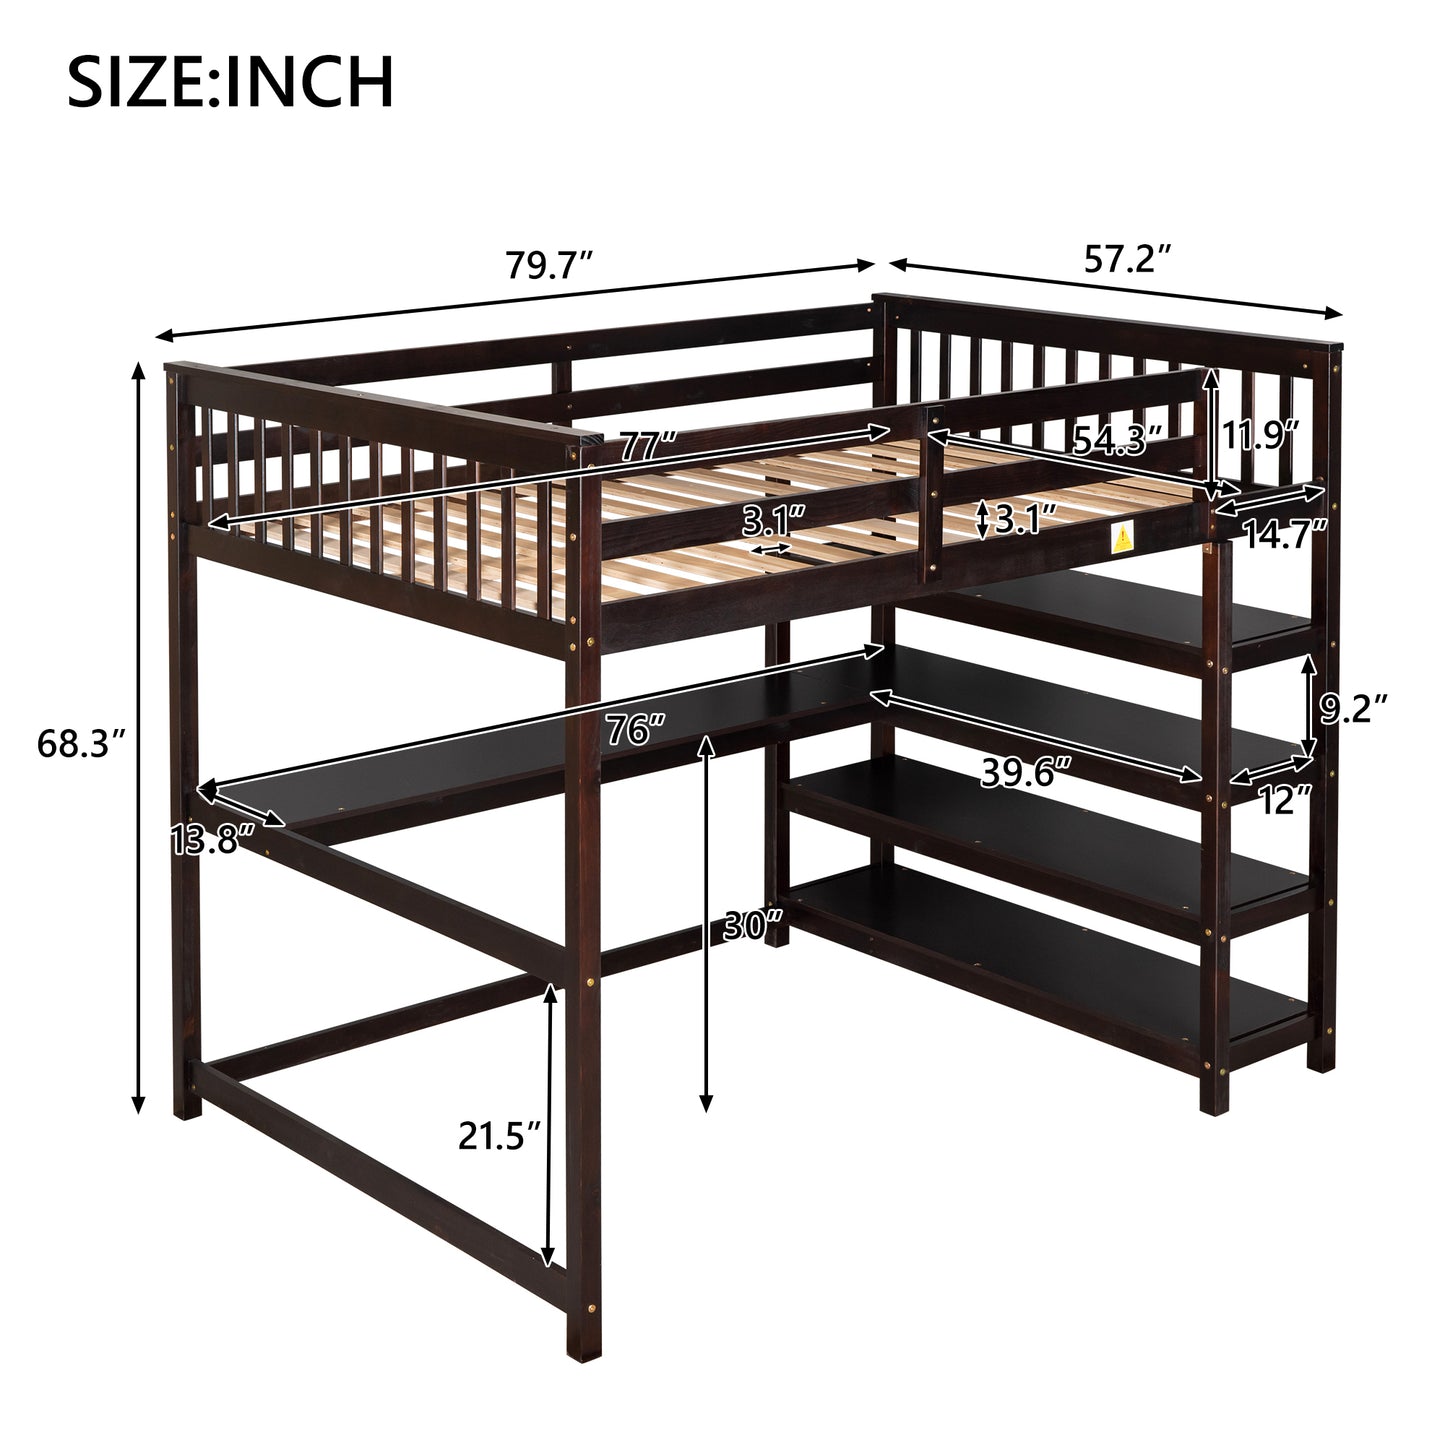 Full Size Loft Bed with Storage Shelves and Under-bed Desk, Espresso